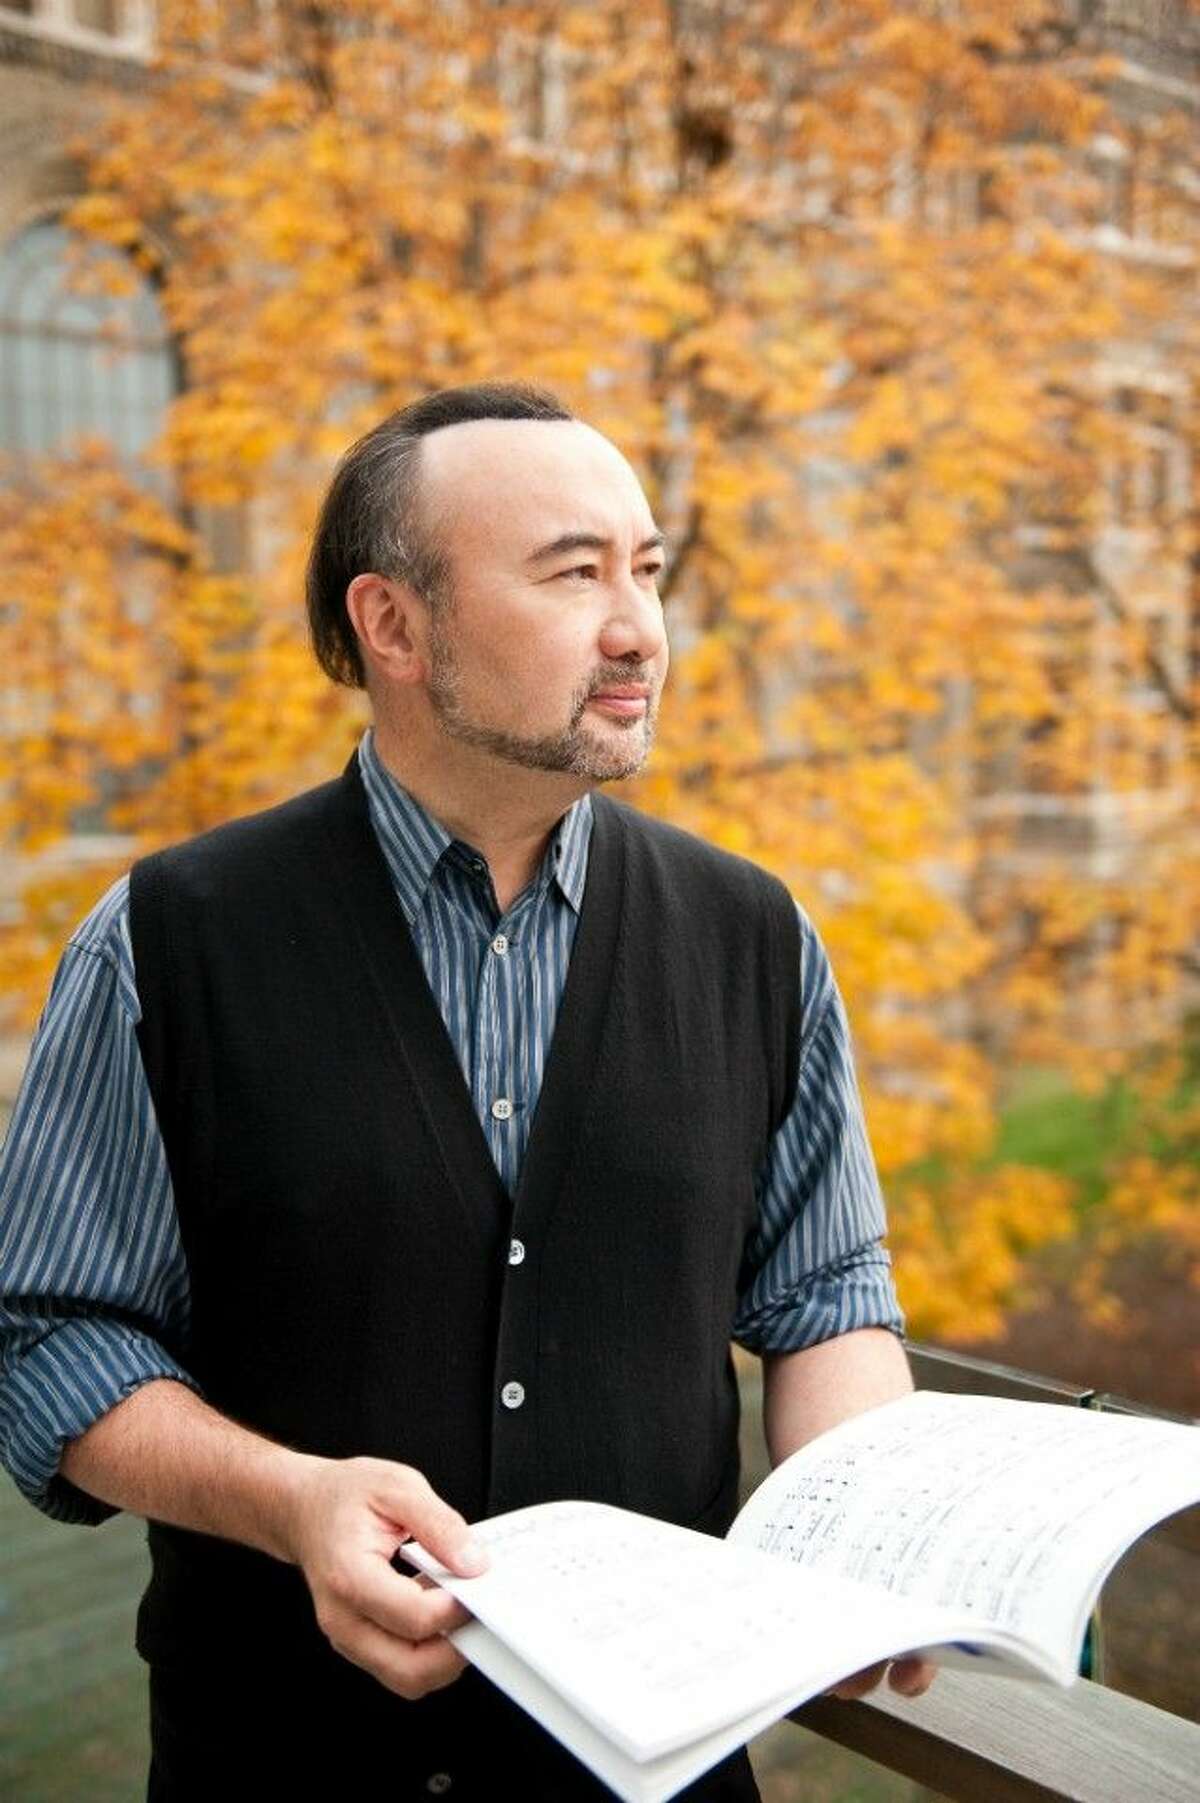 A veteran of the international concert stage, Jon Kimura Parker has performed as guest soloist with the Philadelphia Orchestra and Wolfgang Sawallisch in Carnegie Hall, toured Europe with the Royal Philharmonic Orchestra and Andre Previn, and shared the stage with Jessye Norman at Berlin’s famed Philharmonie.